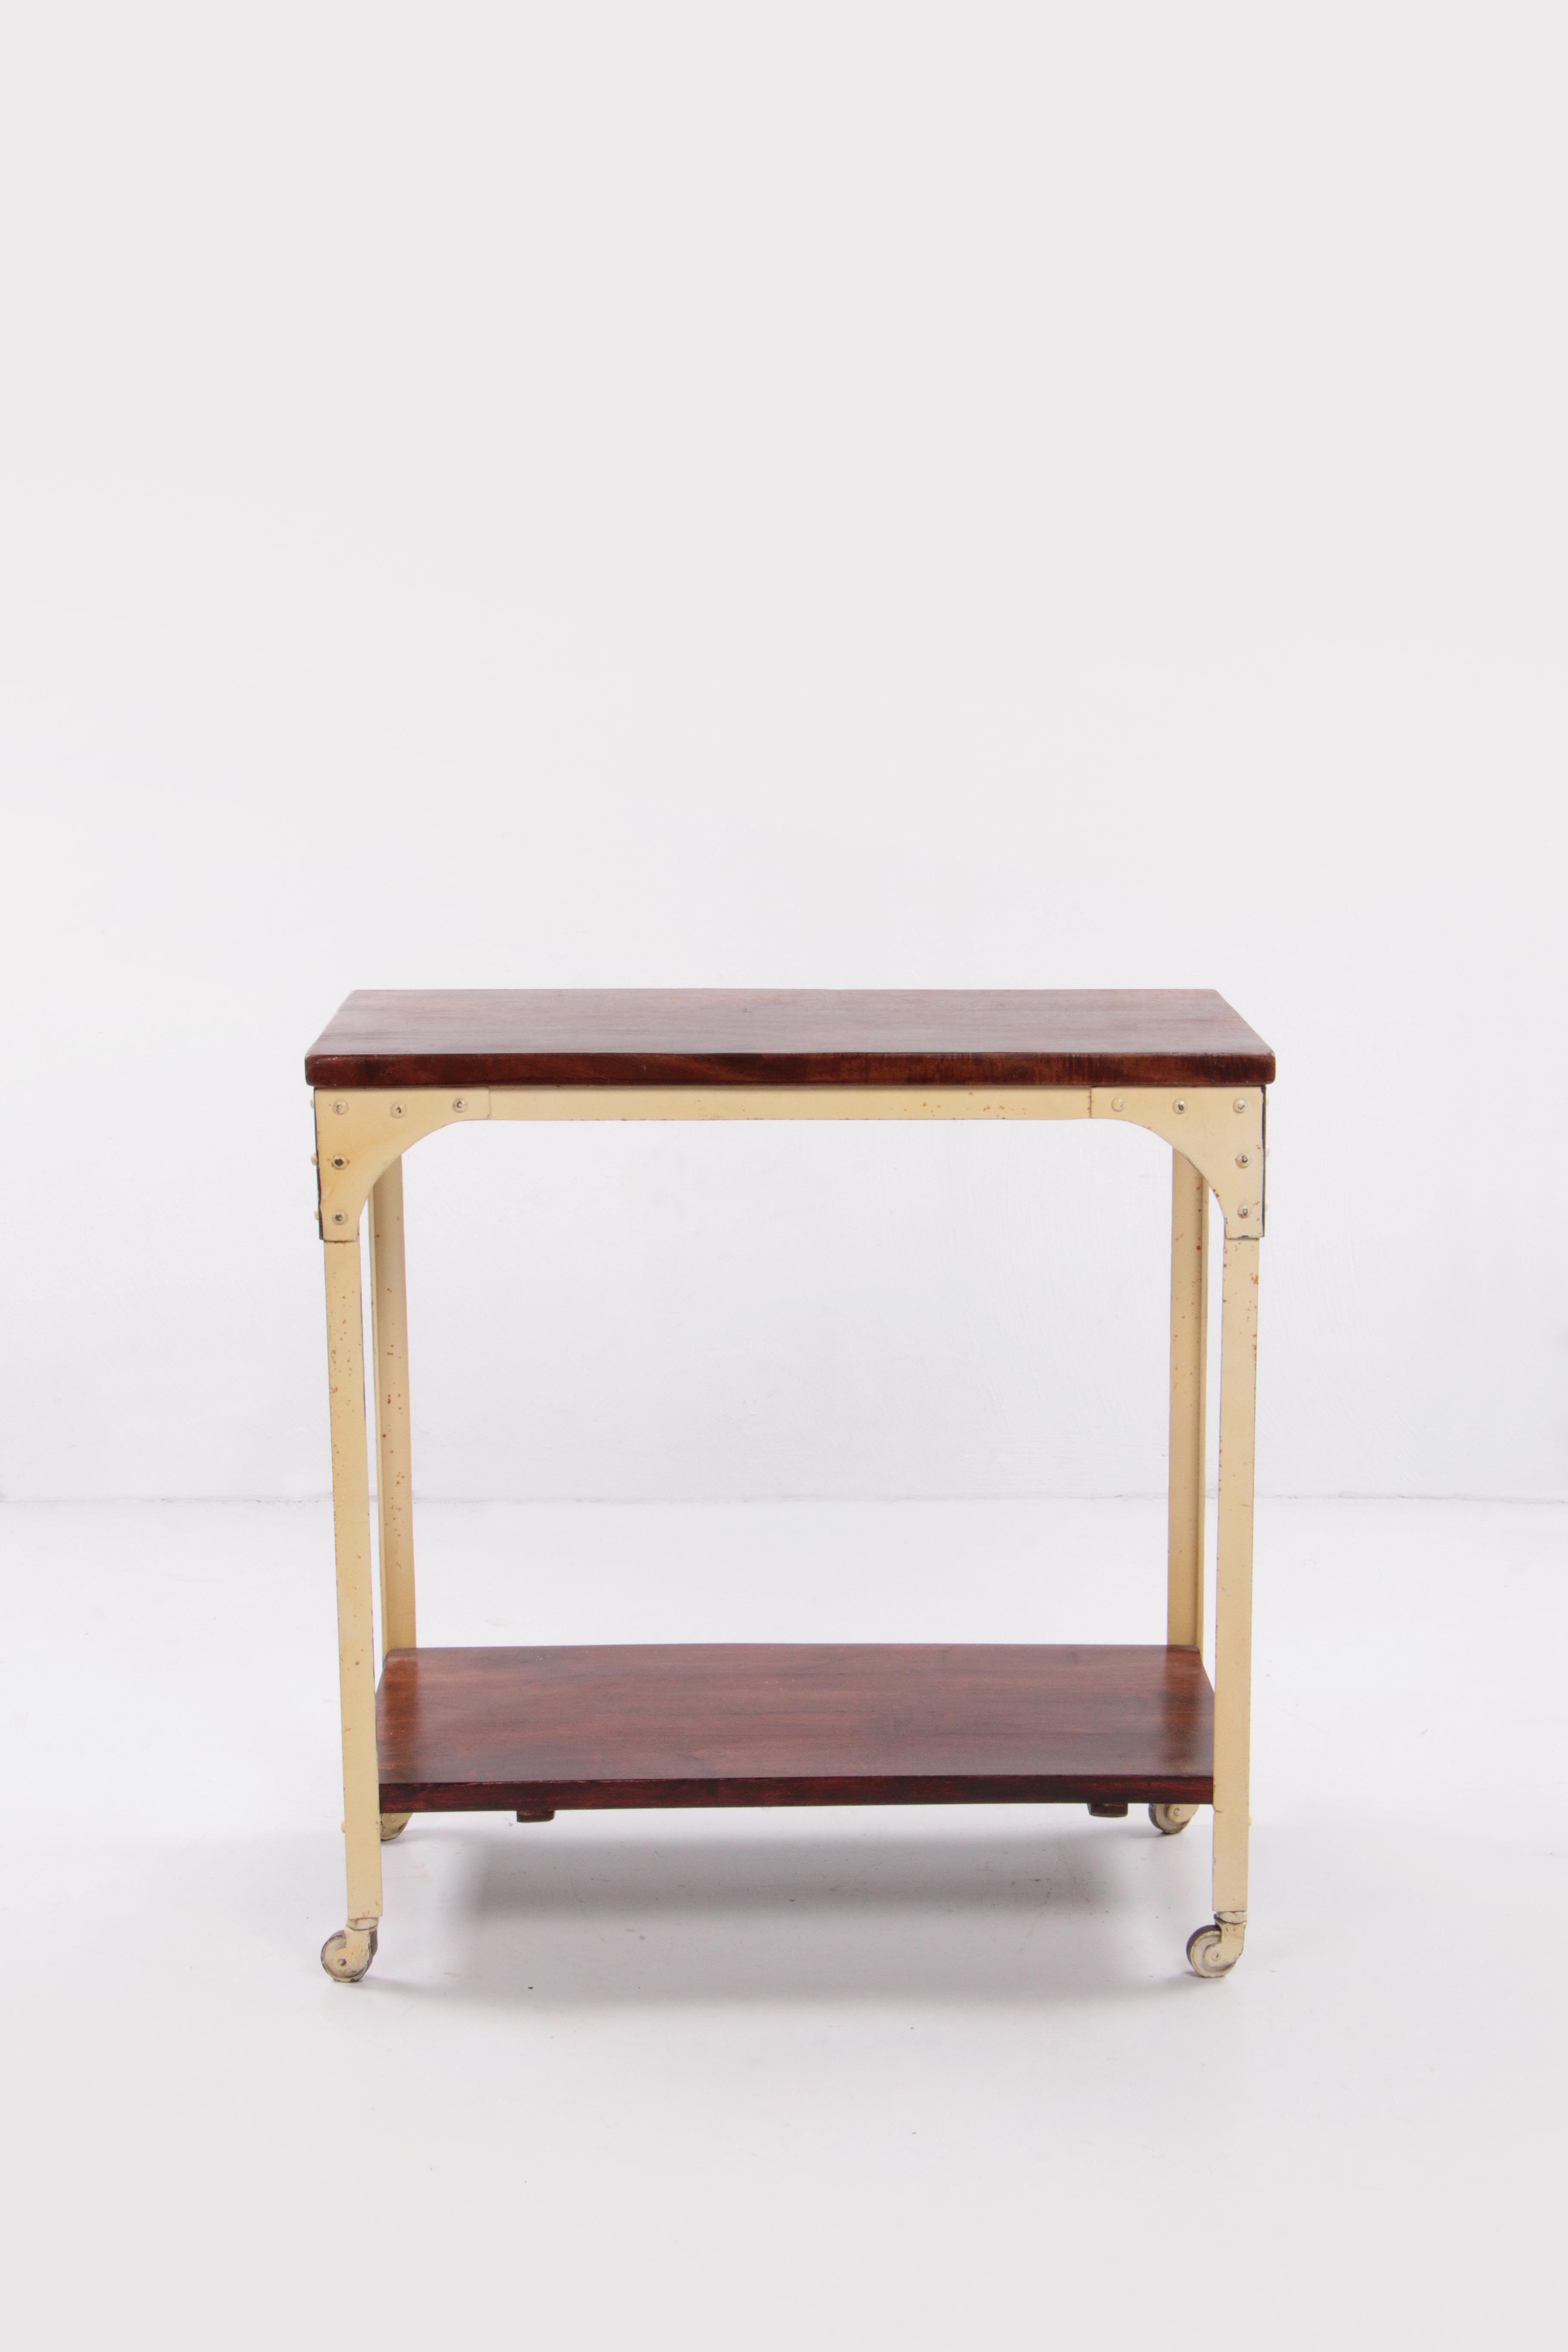 Industrial Robust Side Table Made of Wood and Metal, 1970 England For Sale 3